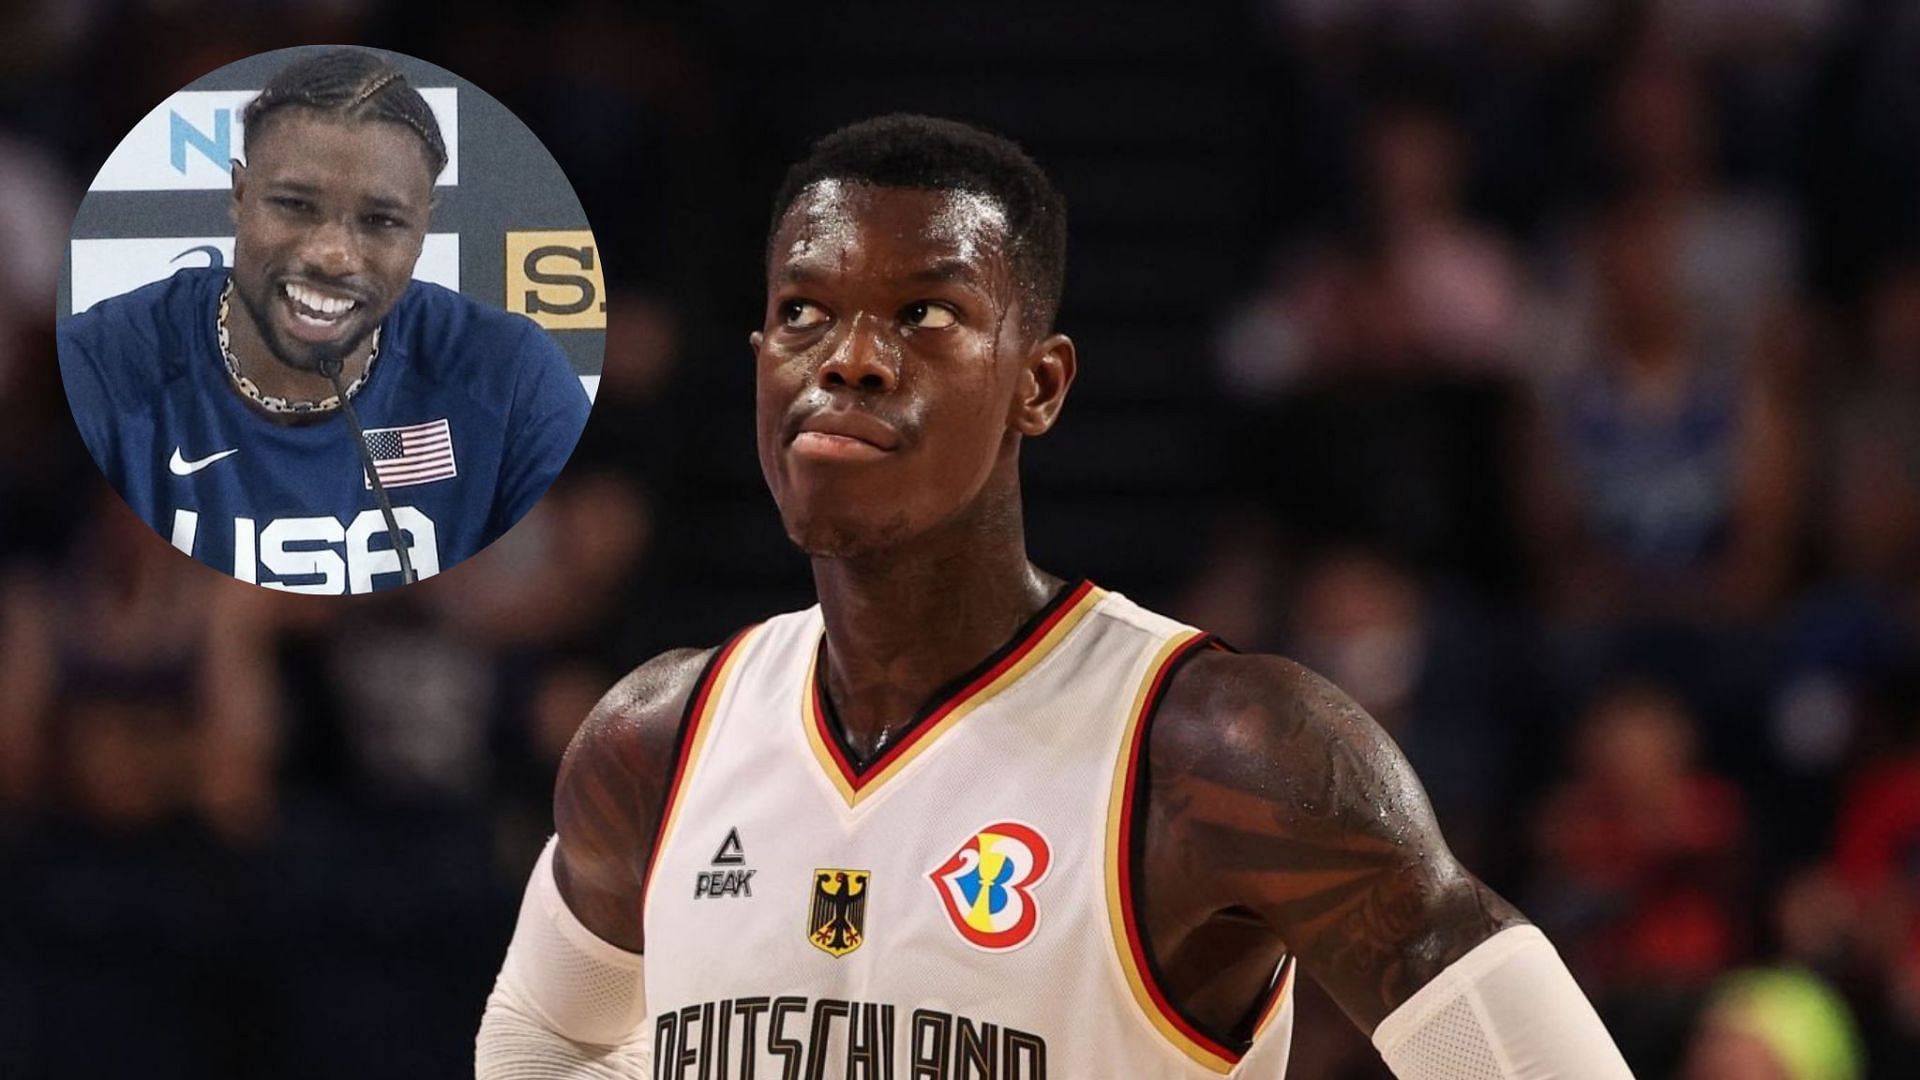 Dennis Schroder believes Germany are the World Champions